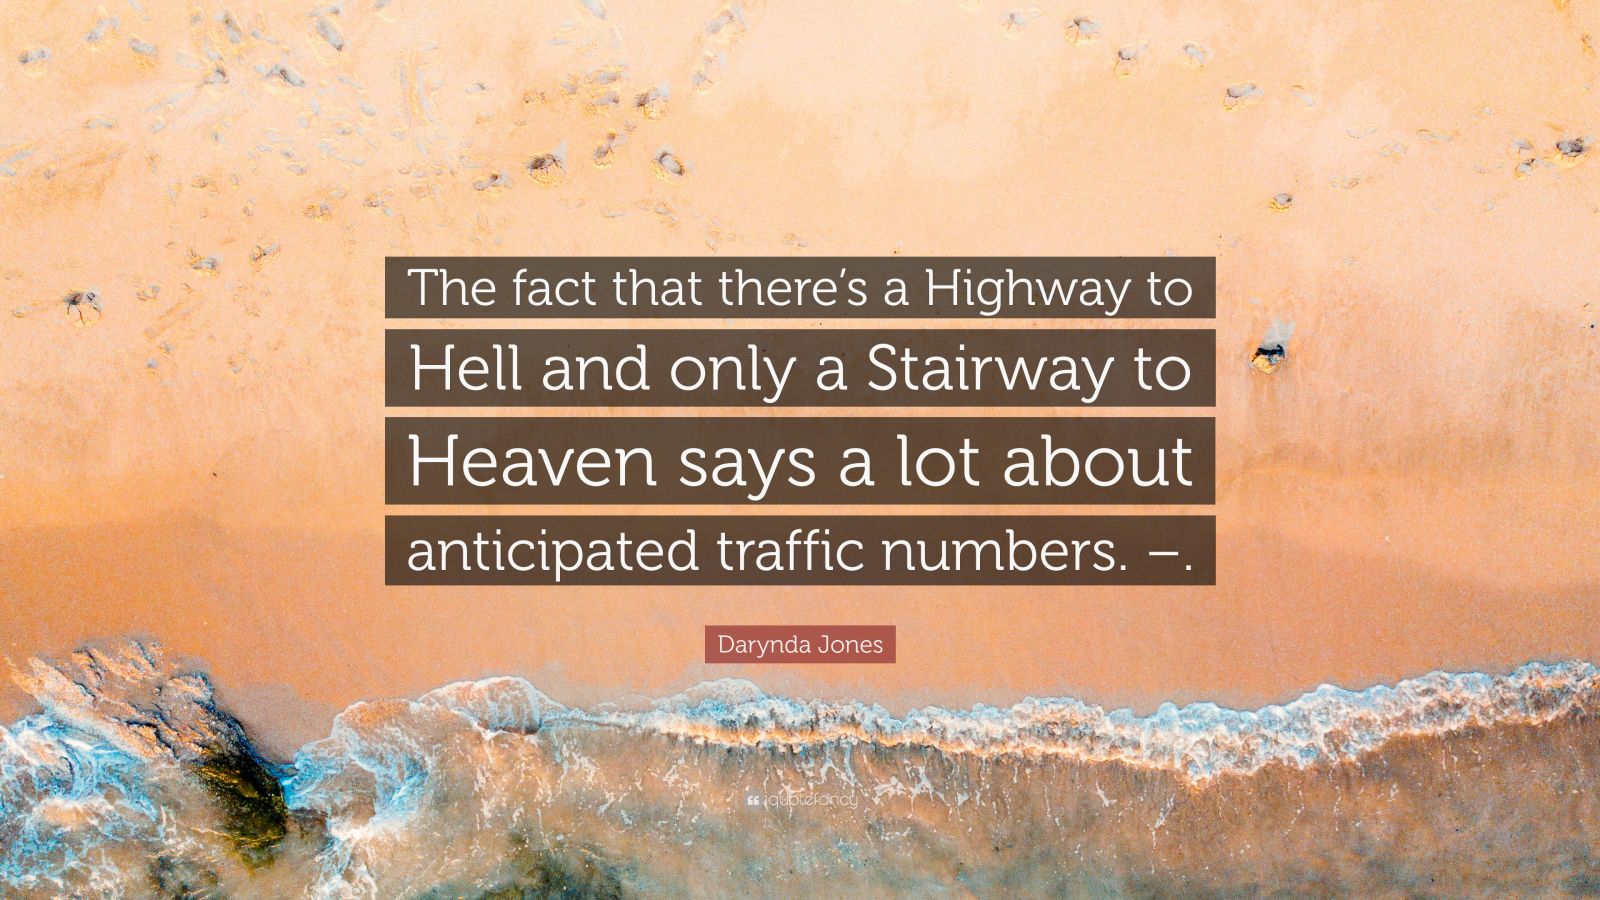 Darynda Jones Quote: “The fact that there's a Highway to Hell and only a  Stairway to Heaven says a lot about anticipated traffic numbers. –.”